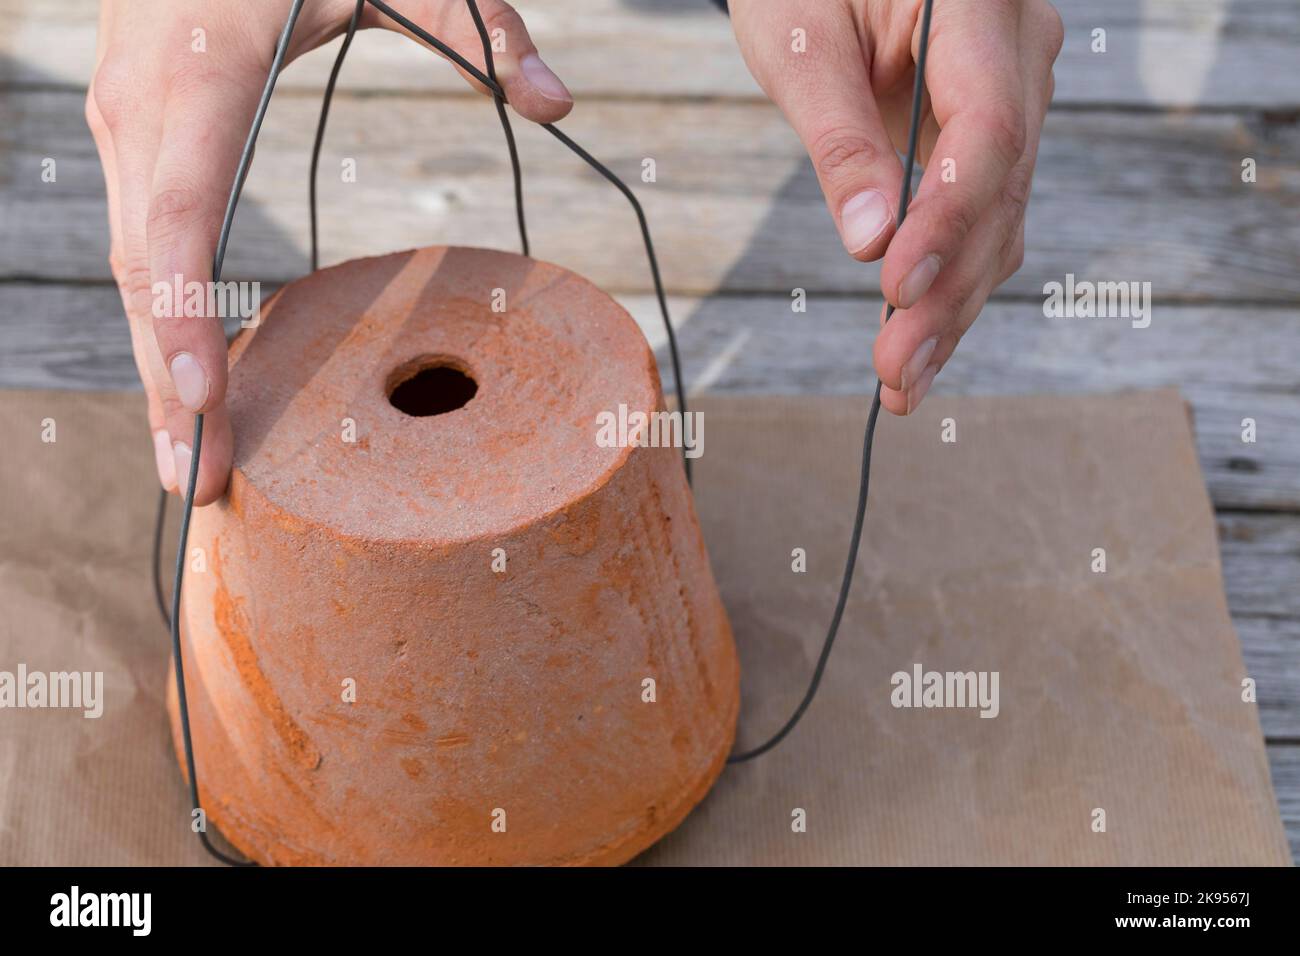 making a dispenser for nesting material for birds or squirrels, step 3: the free end of the wire are bent around a flowerpot, series picture 3/5 Stock Photo